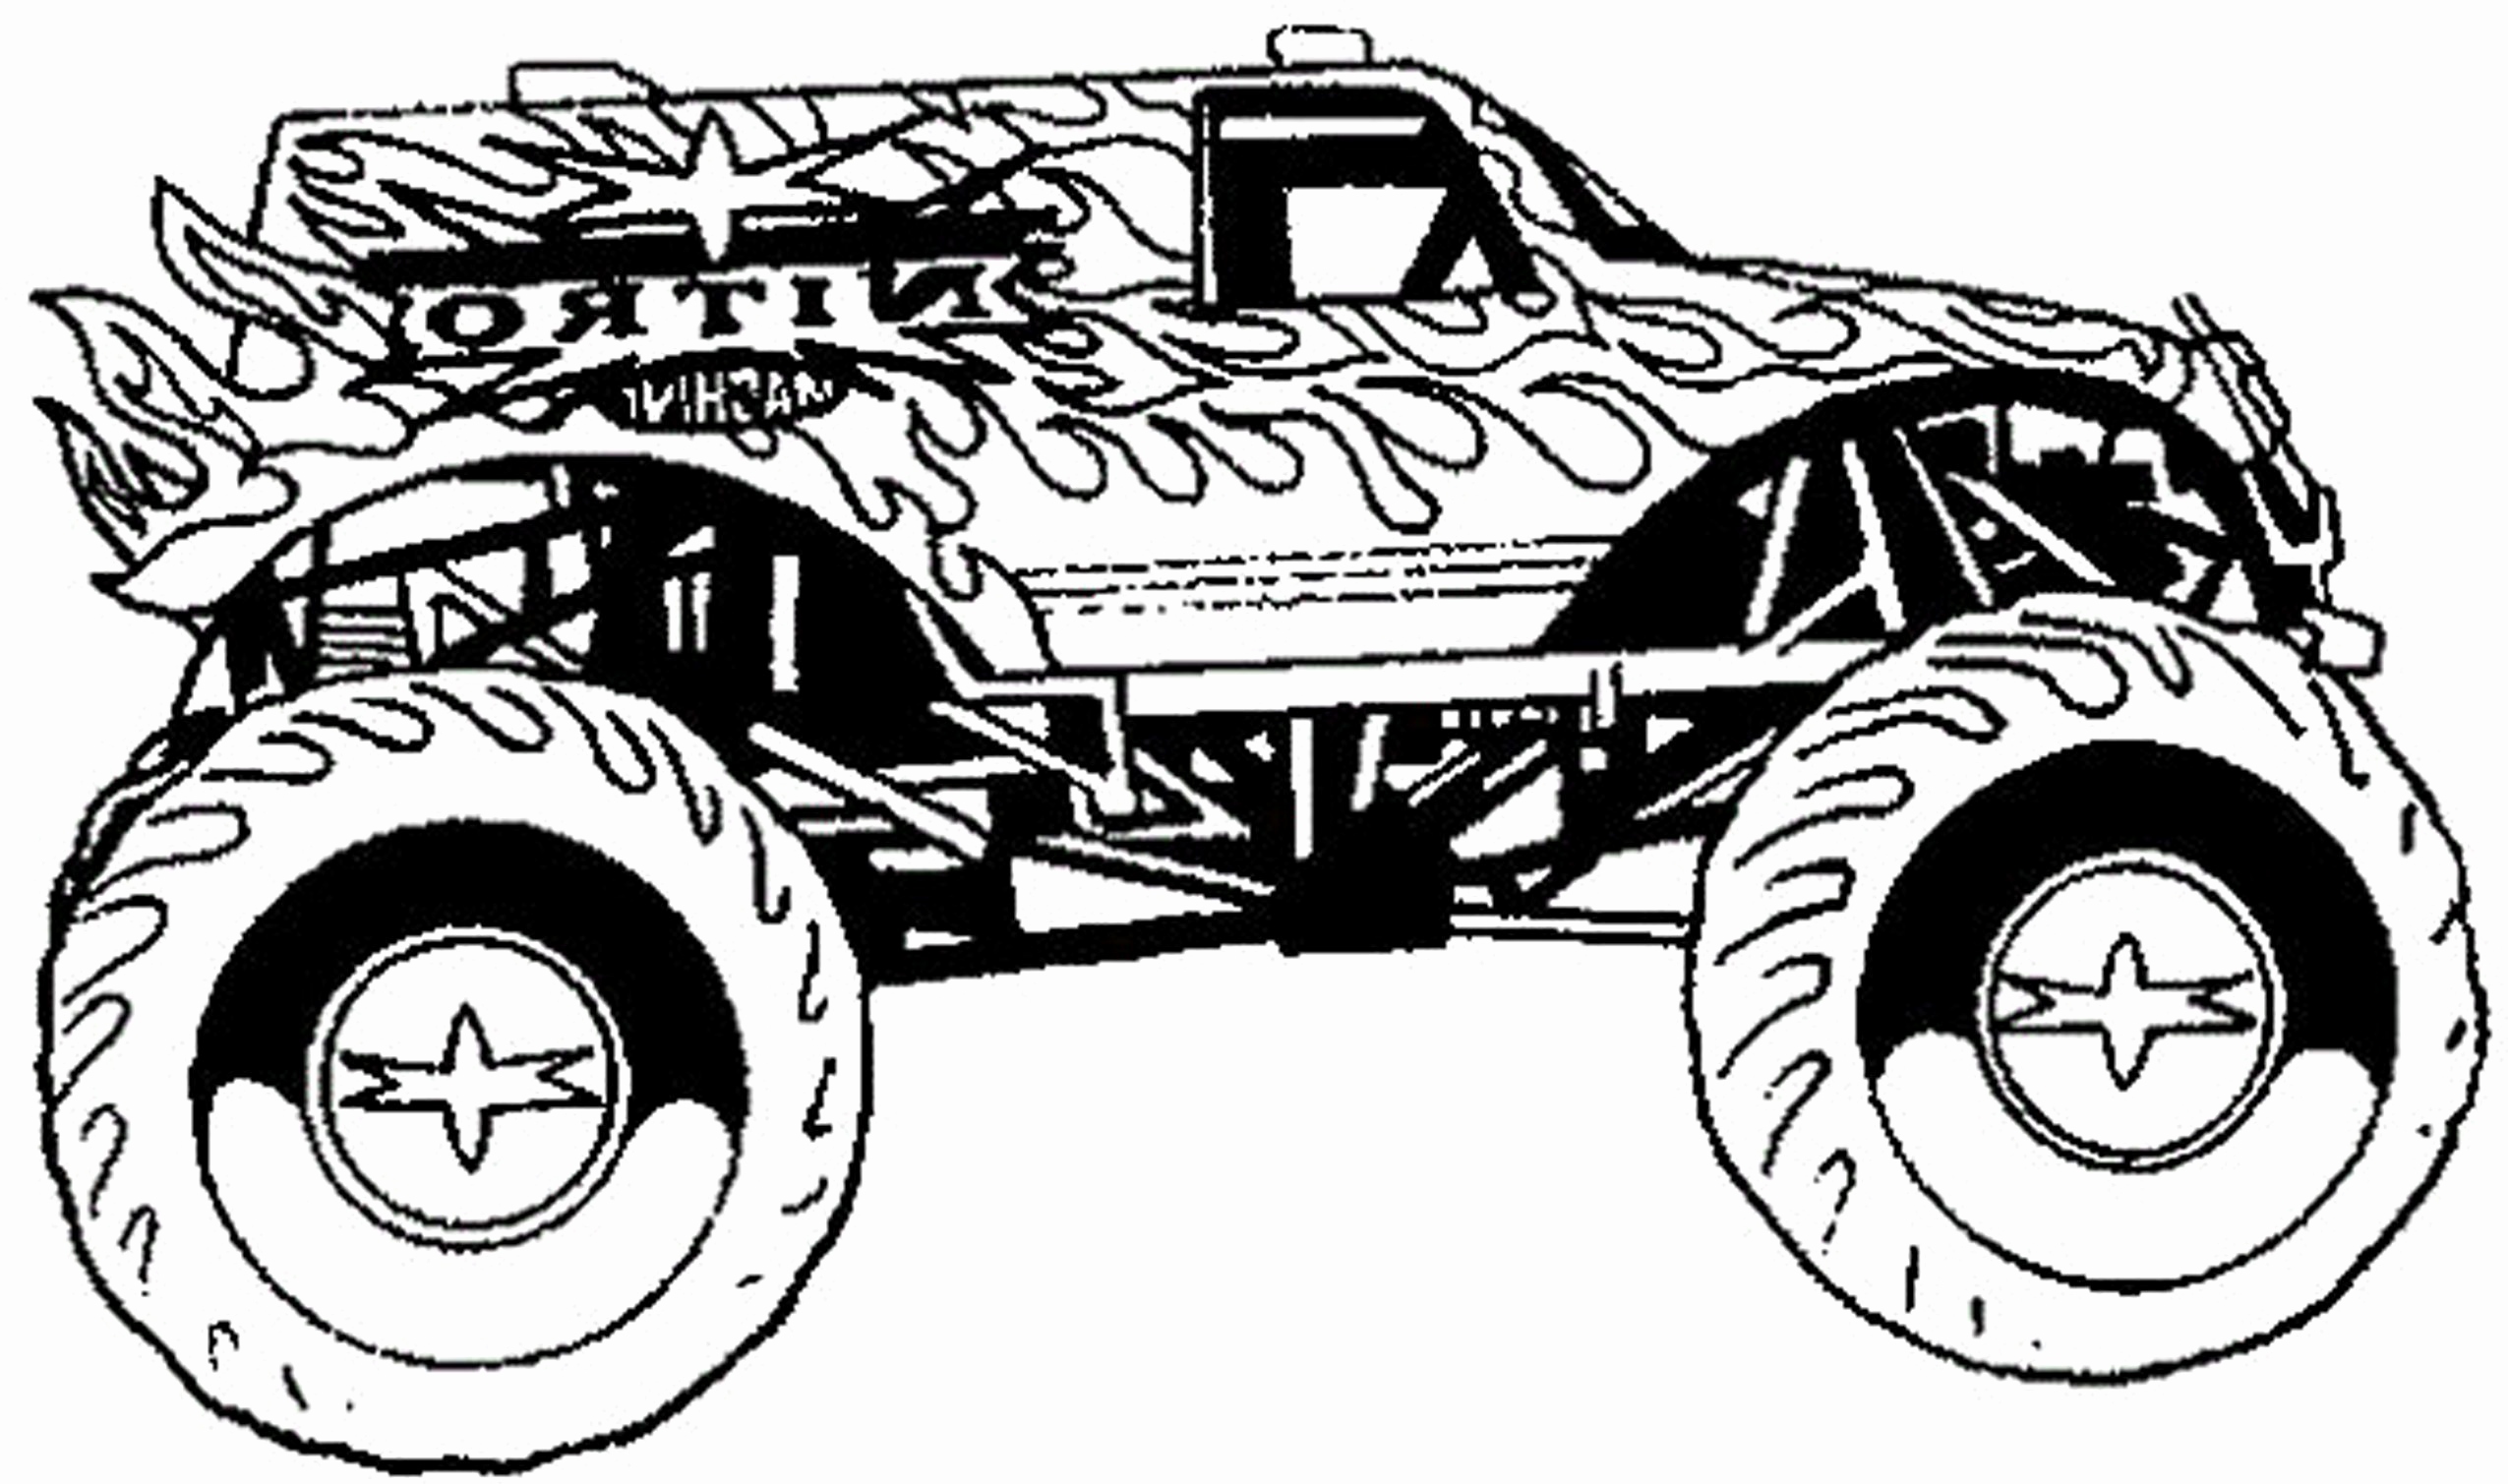 Max D Monster Truck Coloring Pages at GetColorings.com | Free printable